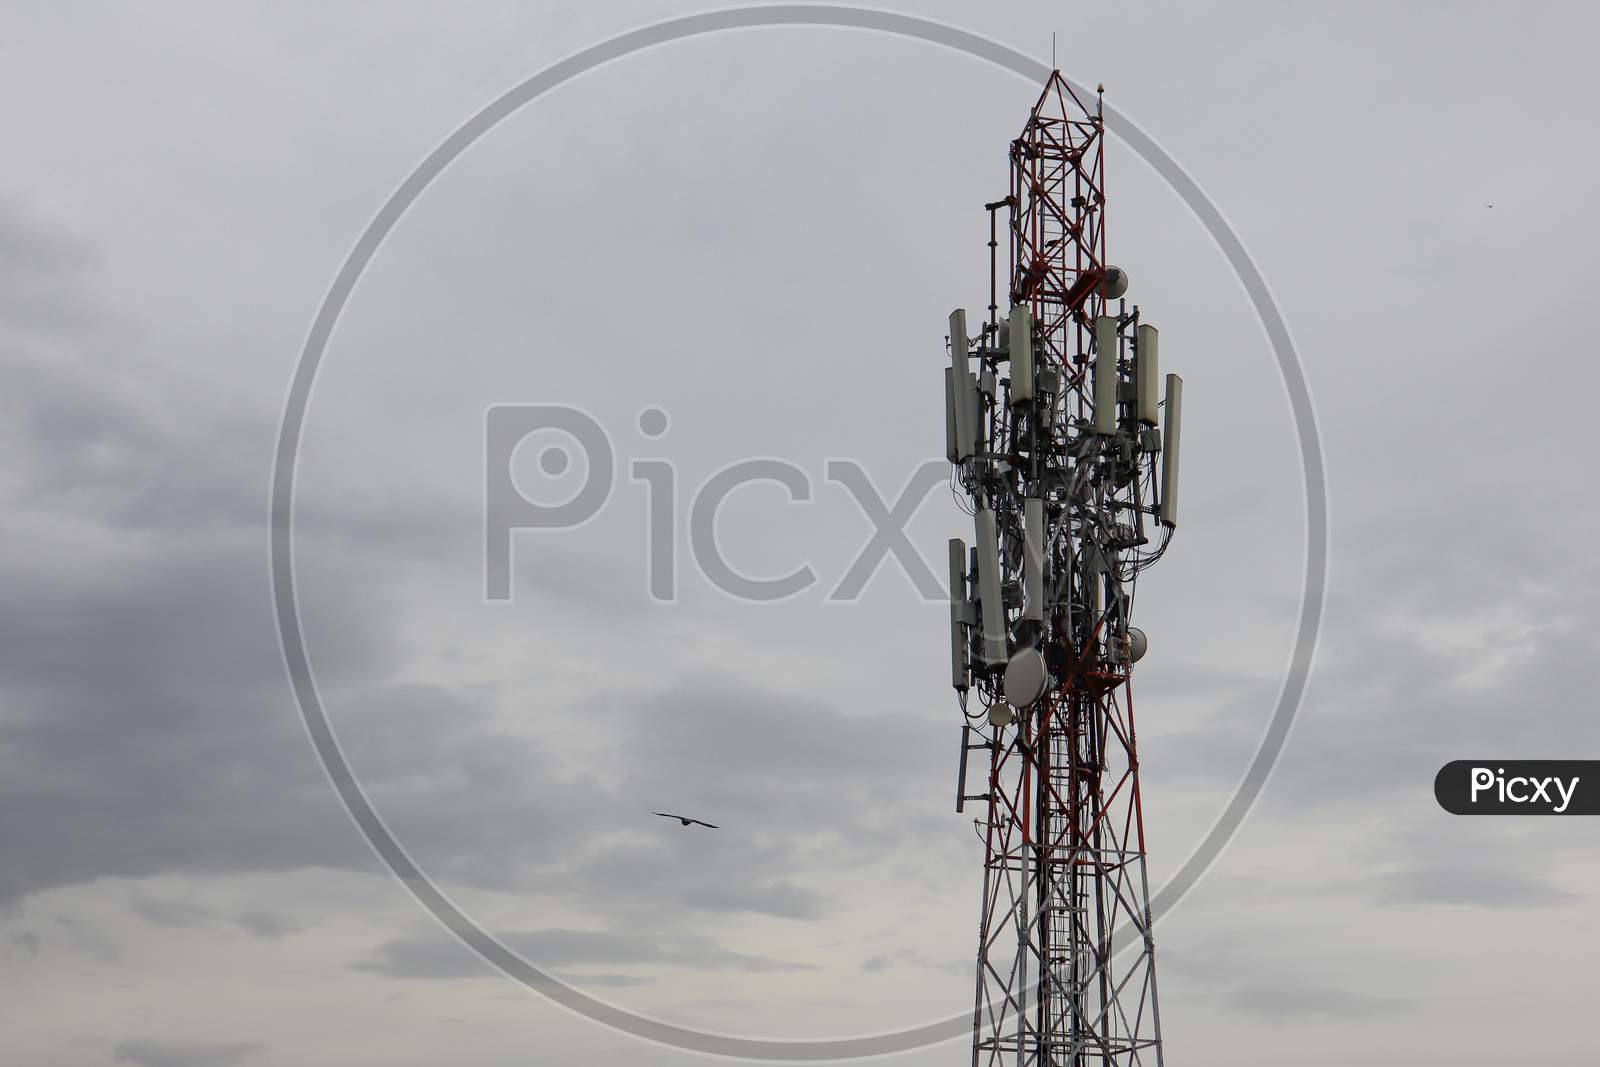 Mobile telecommunication tower or cell tower with antennae and electronic communications equipments.